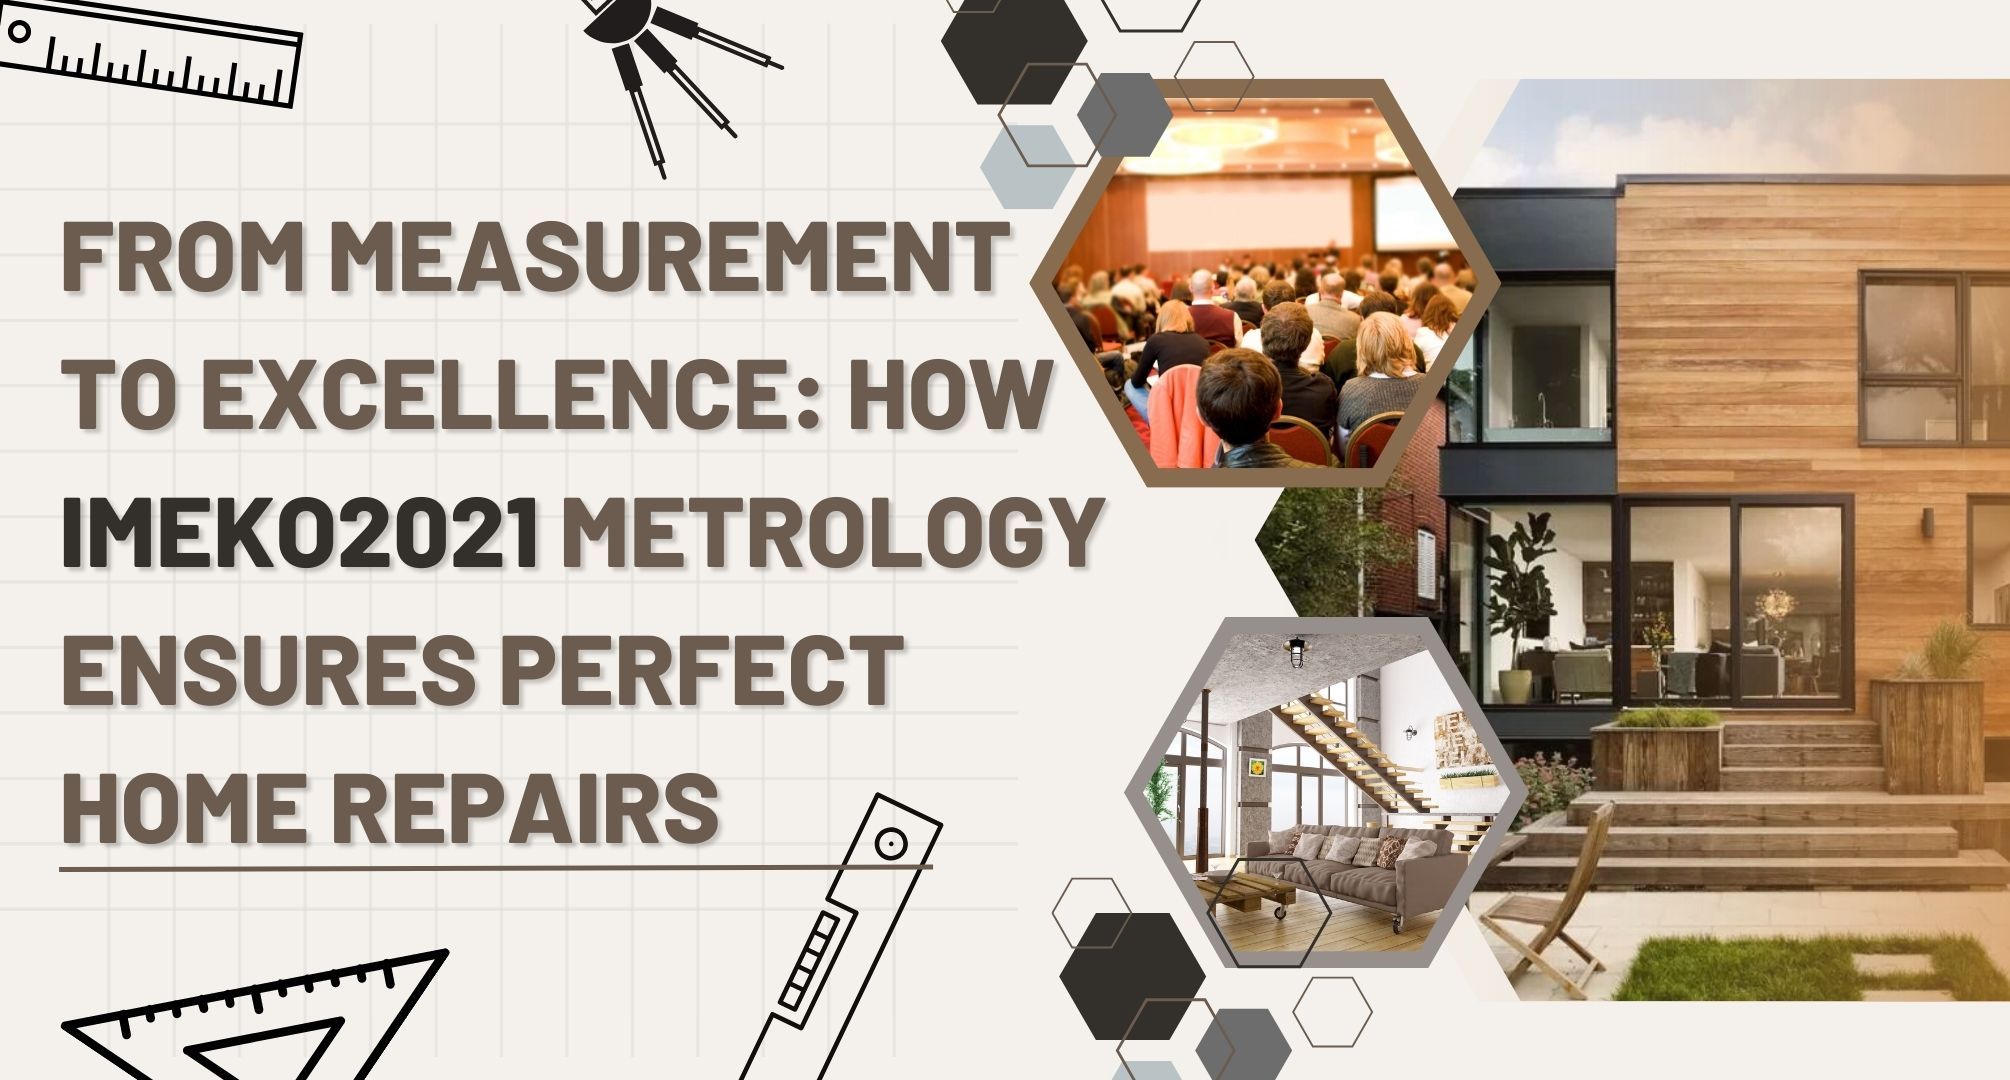 From Measurement to Excellence How IMEKO2021 Metrology Ensures Perfect Home Repairs